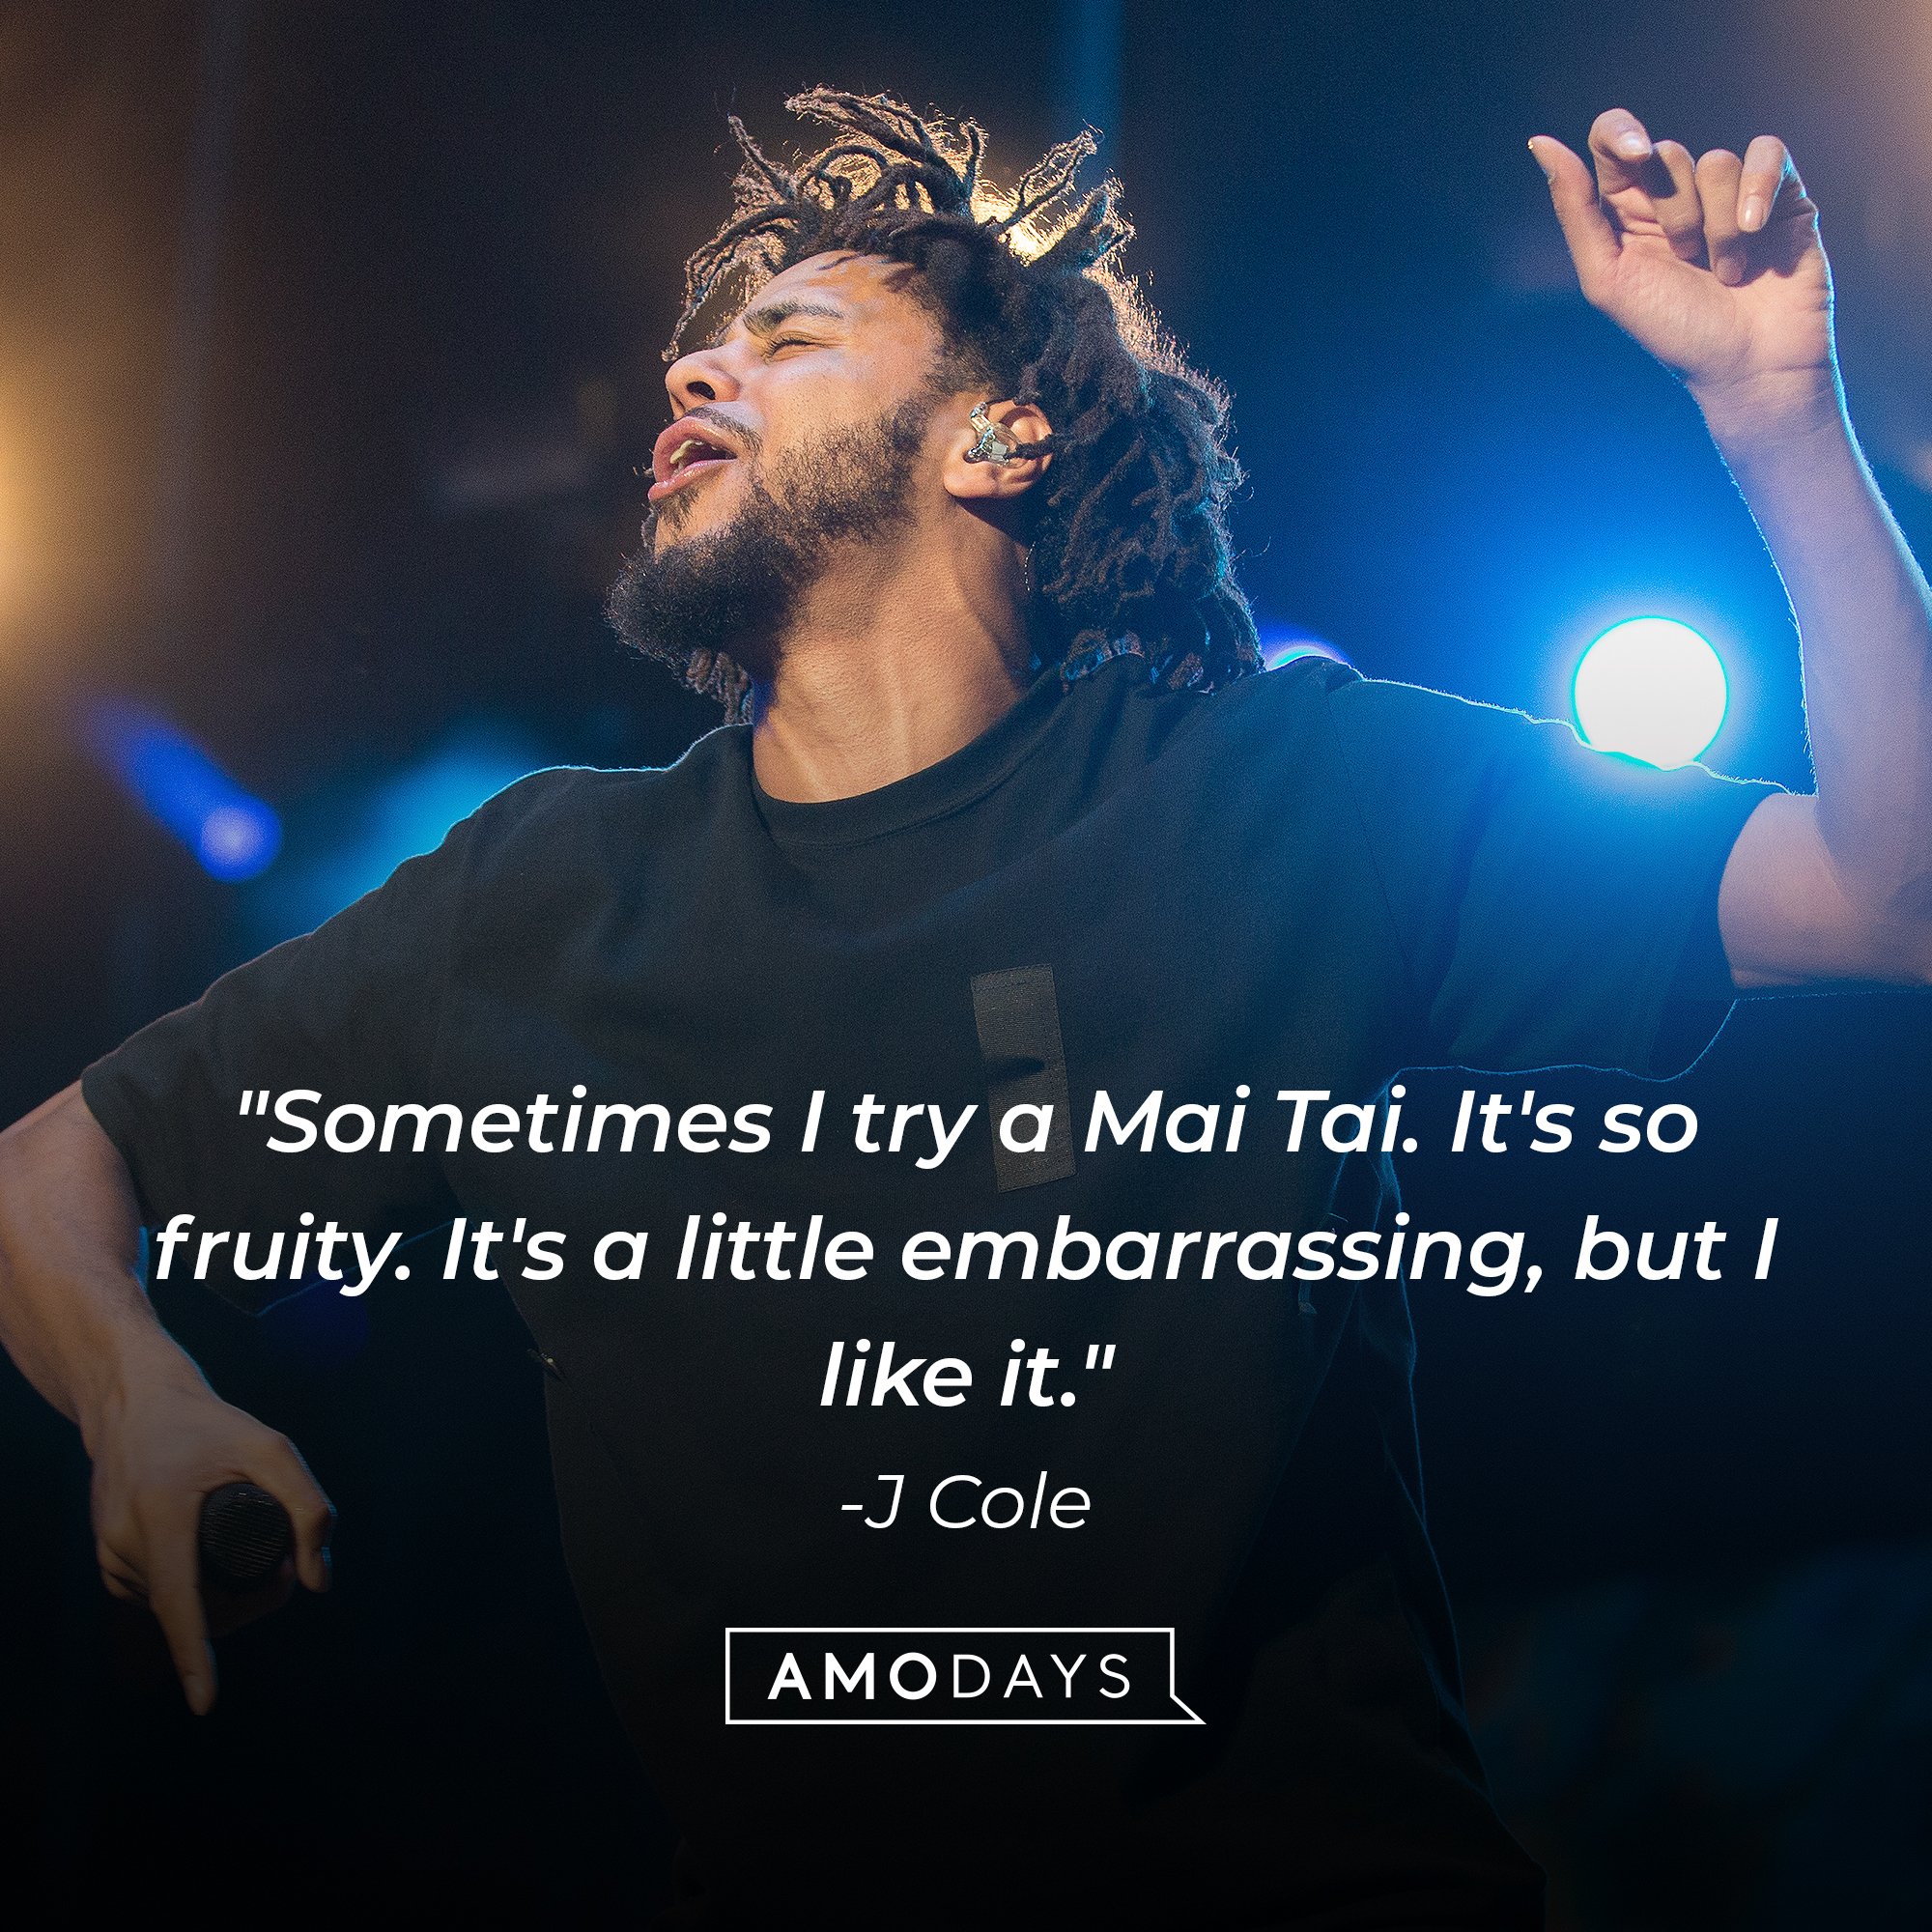 J Cole's quote: "Sometimes I try a Mai Tai. It's so fruity. It's a little embarrassing, but I like it."  | Image: AmoDays